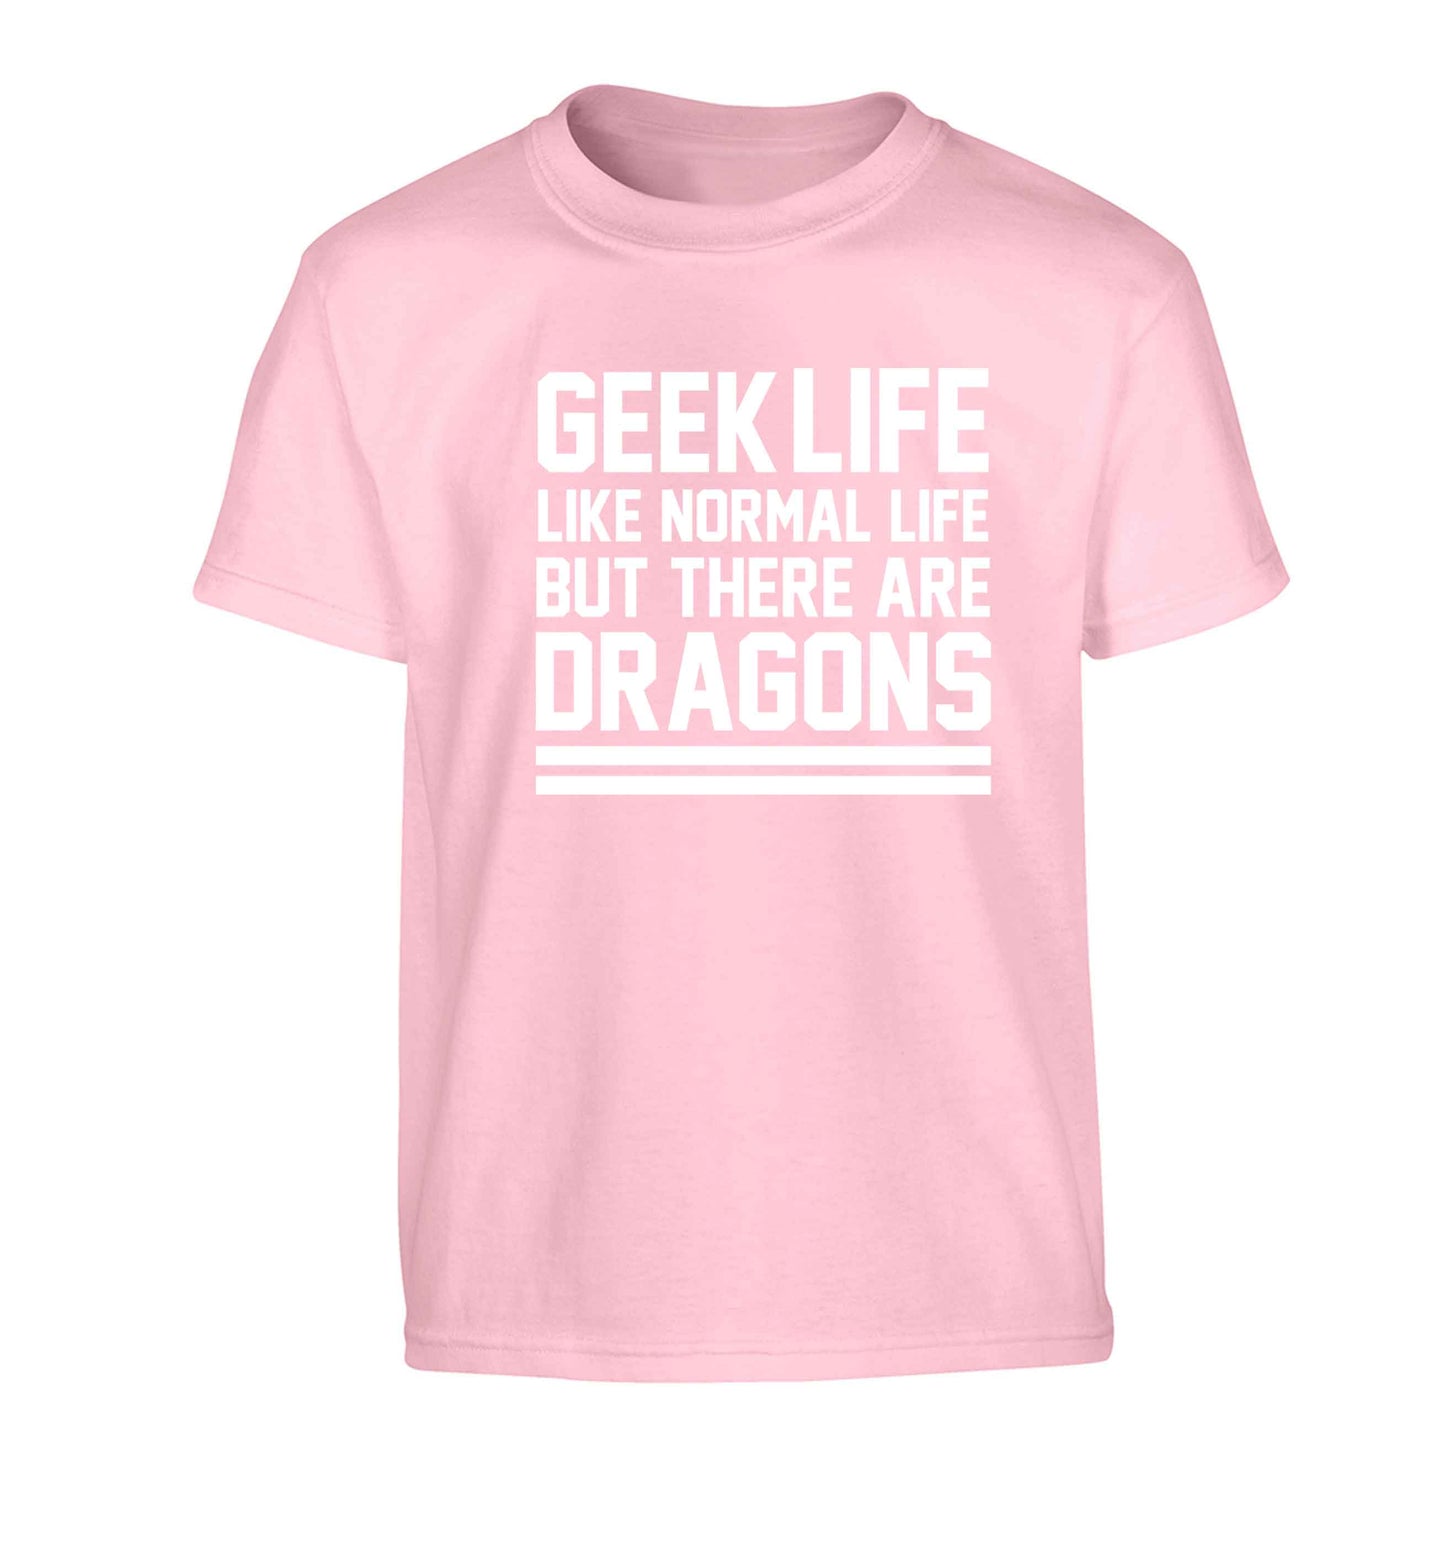 Geek life like normal life but there are dragons Children's light pink Tshirt 12-13 Years